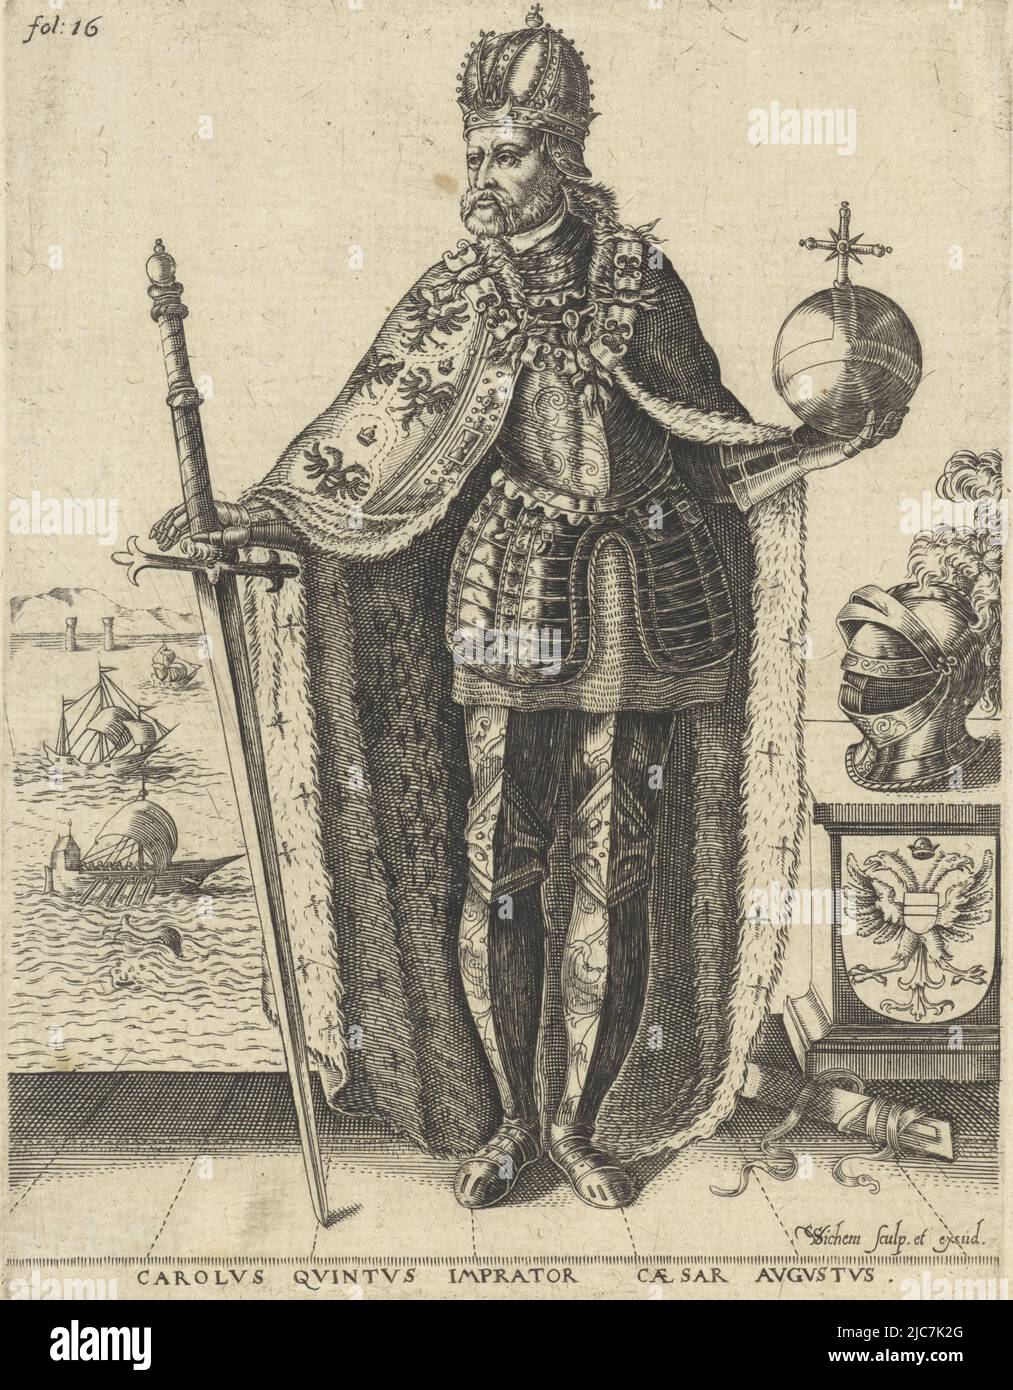 Portrait of Emperor Charles V, wearing crown and richly embroidered, fur-lined cloak. In one hand he holds a large sword, in the other an imperial apple. He is standing next to a pedestal, on which lies the helmet of his armor. The pedestal is decorated with his coat of arms. The background offers a view of the sea, with ships and a dolphin. In the top left corner: fol: 16. Portrait of Charles V of Habsburg, German Emperor, King of Spain Carolus Quintus Imprator[sic!] Caesar Augustus , print maker: Christoffel van Sichem (I), (mentioned on object), publisher: Christoffel van Sichem (I), ( Stock Photo